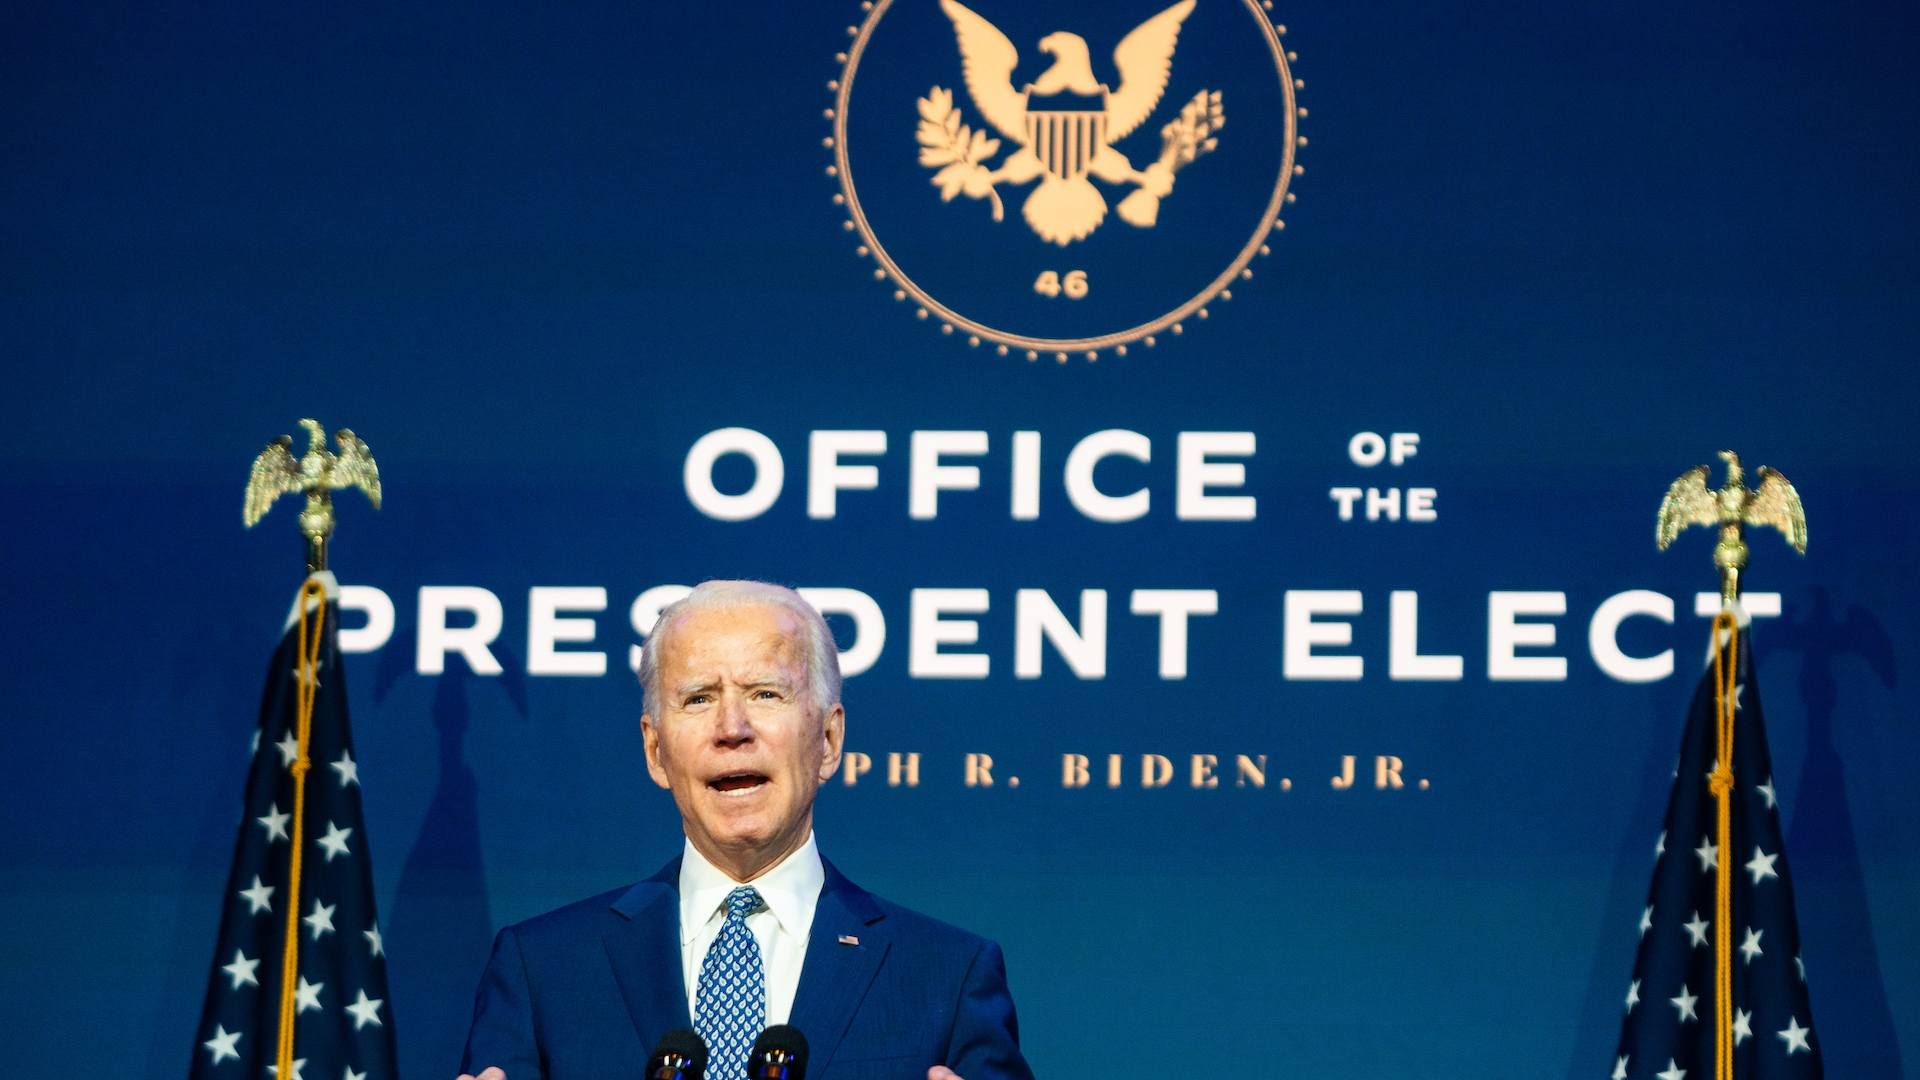 Biden has ambitious plans to curb the coronavirus. But they could face big  hurdles in a divided country and Congress. The Washington Post